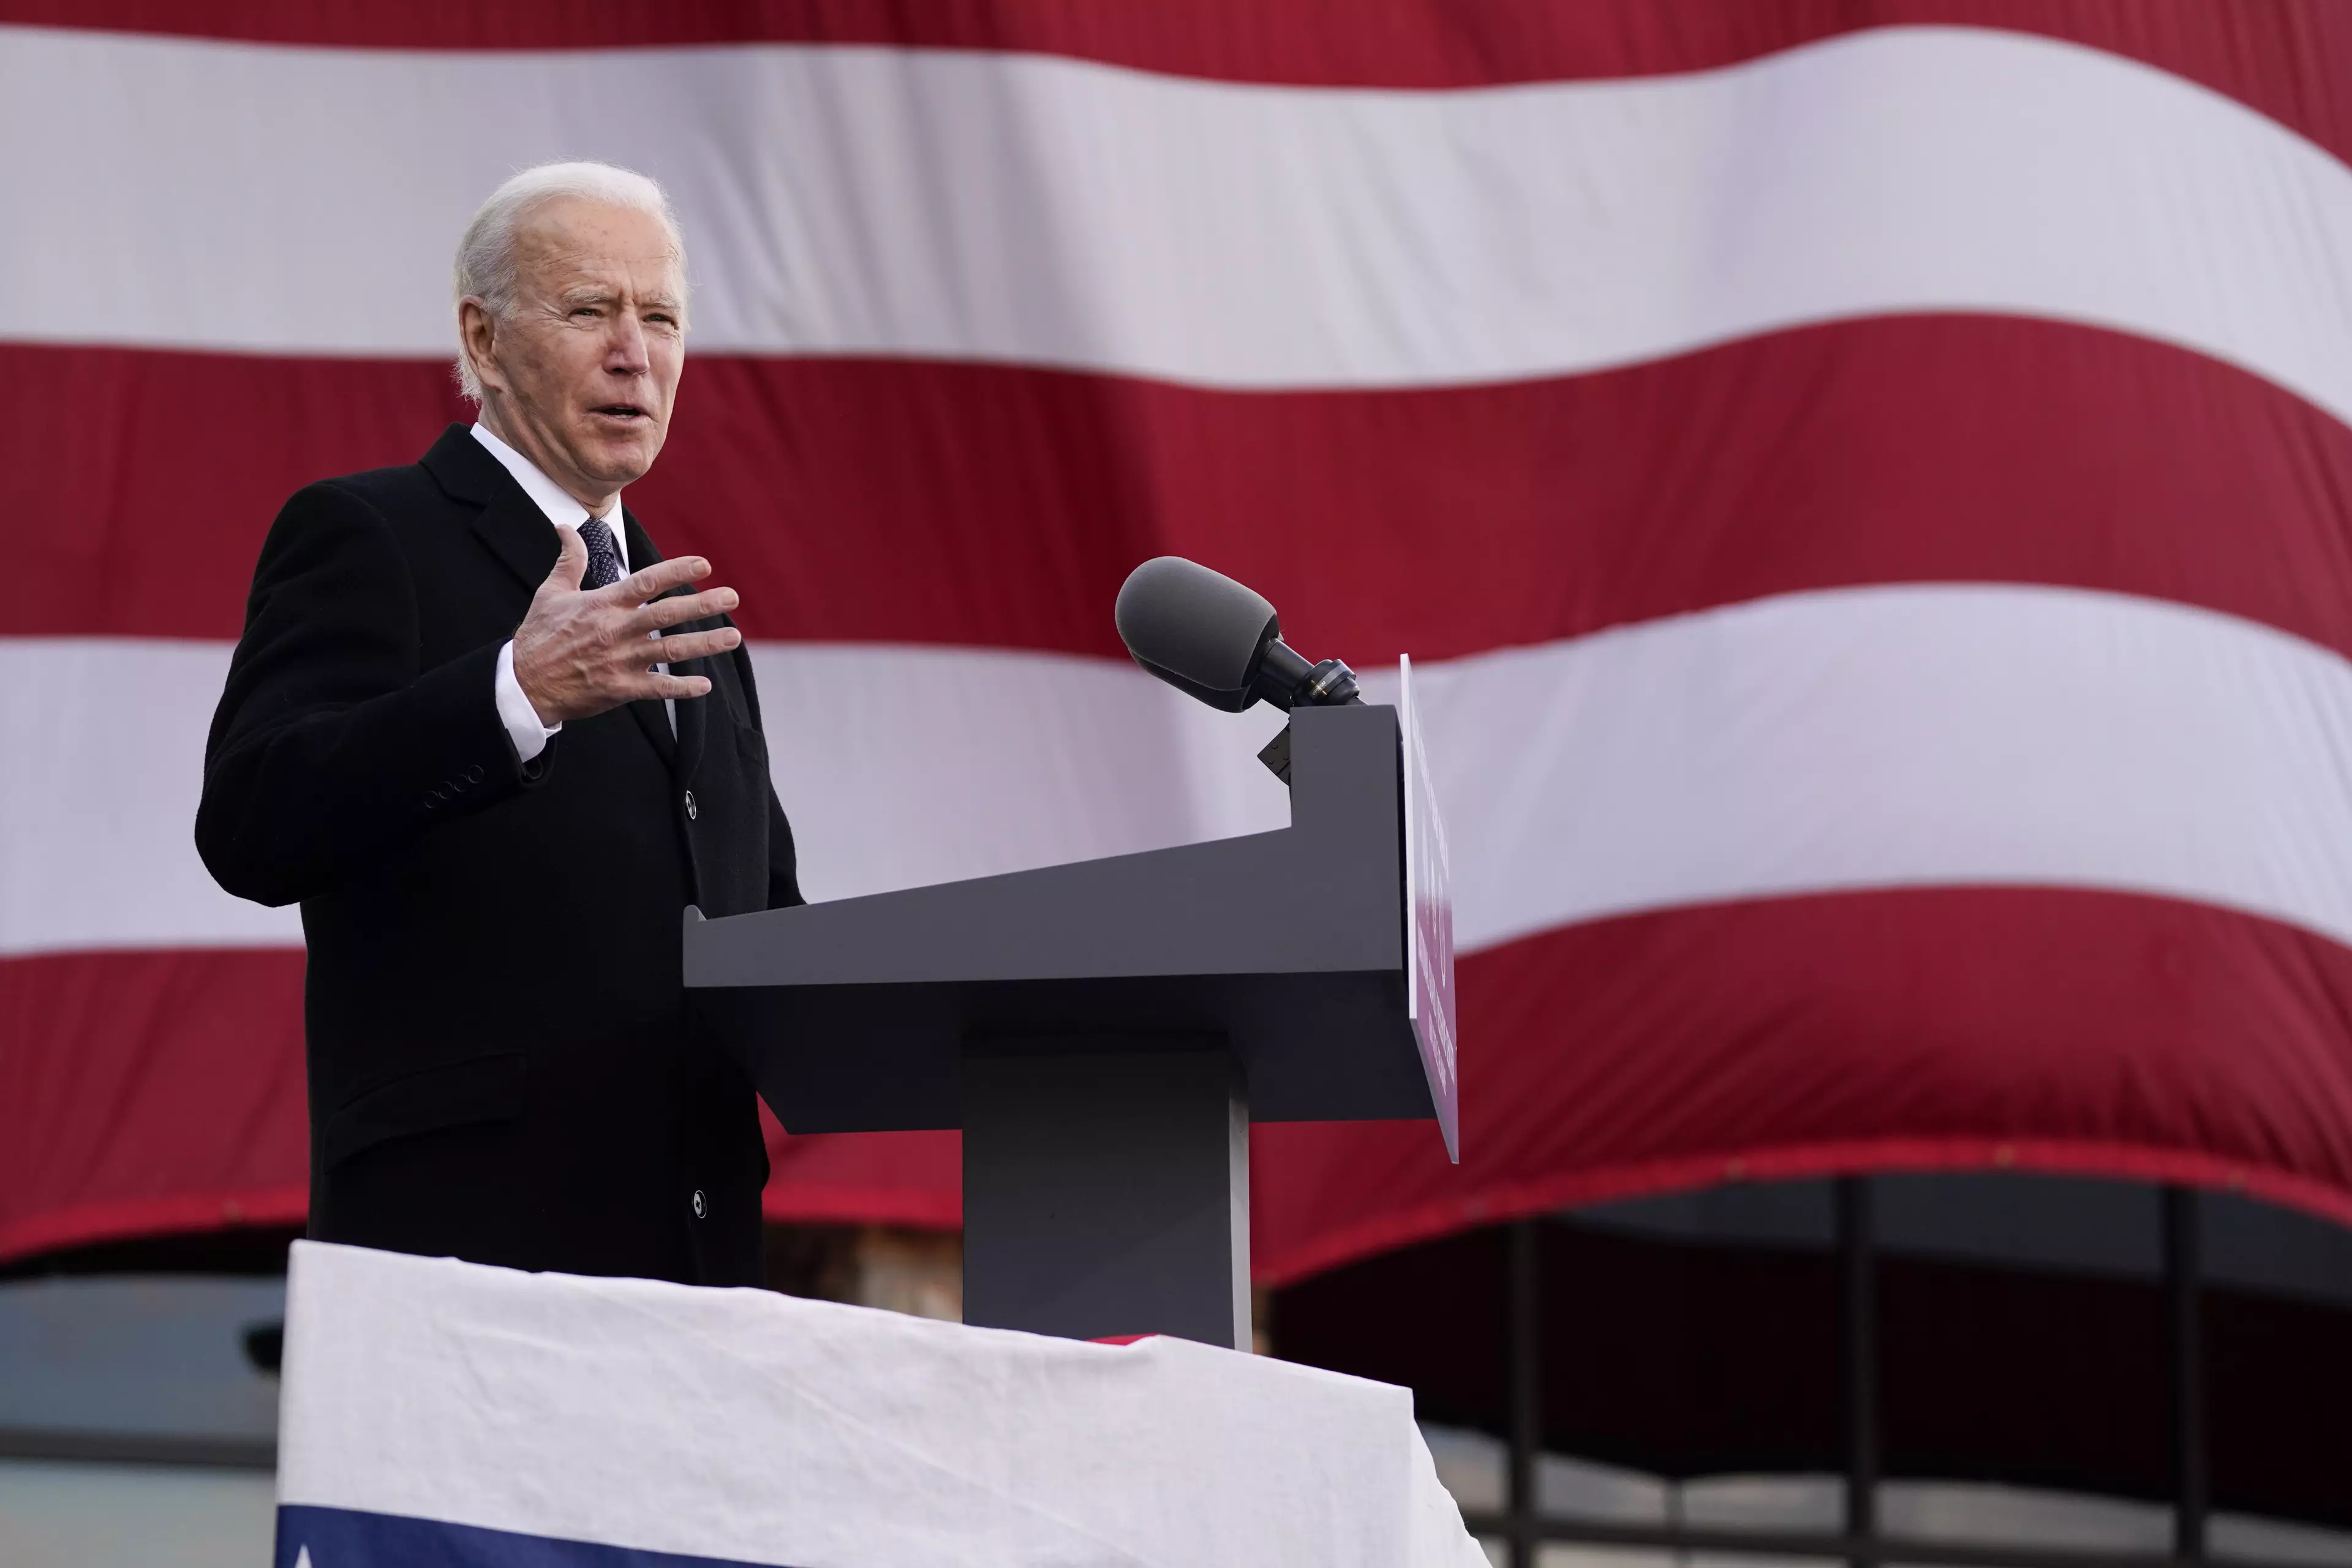 Joe Biden has been sworn in as the 46th President of the United States.